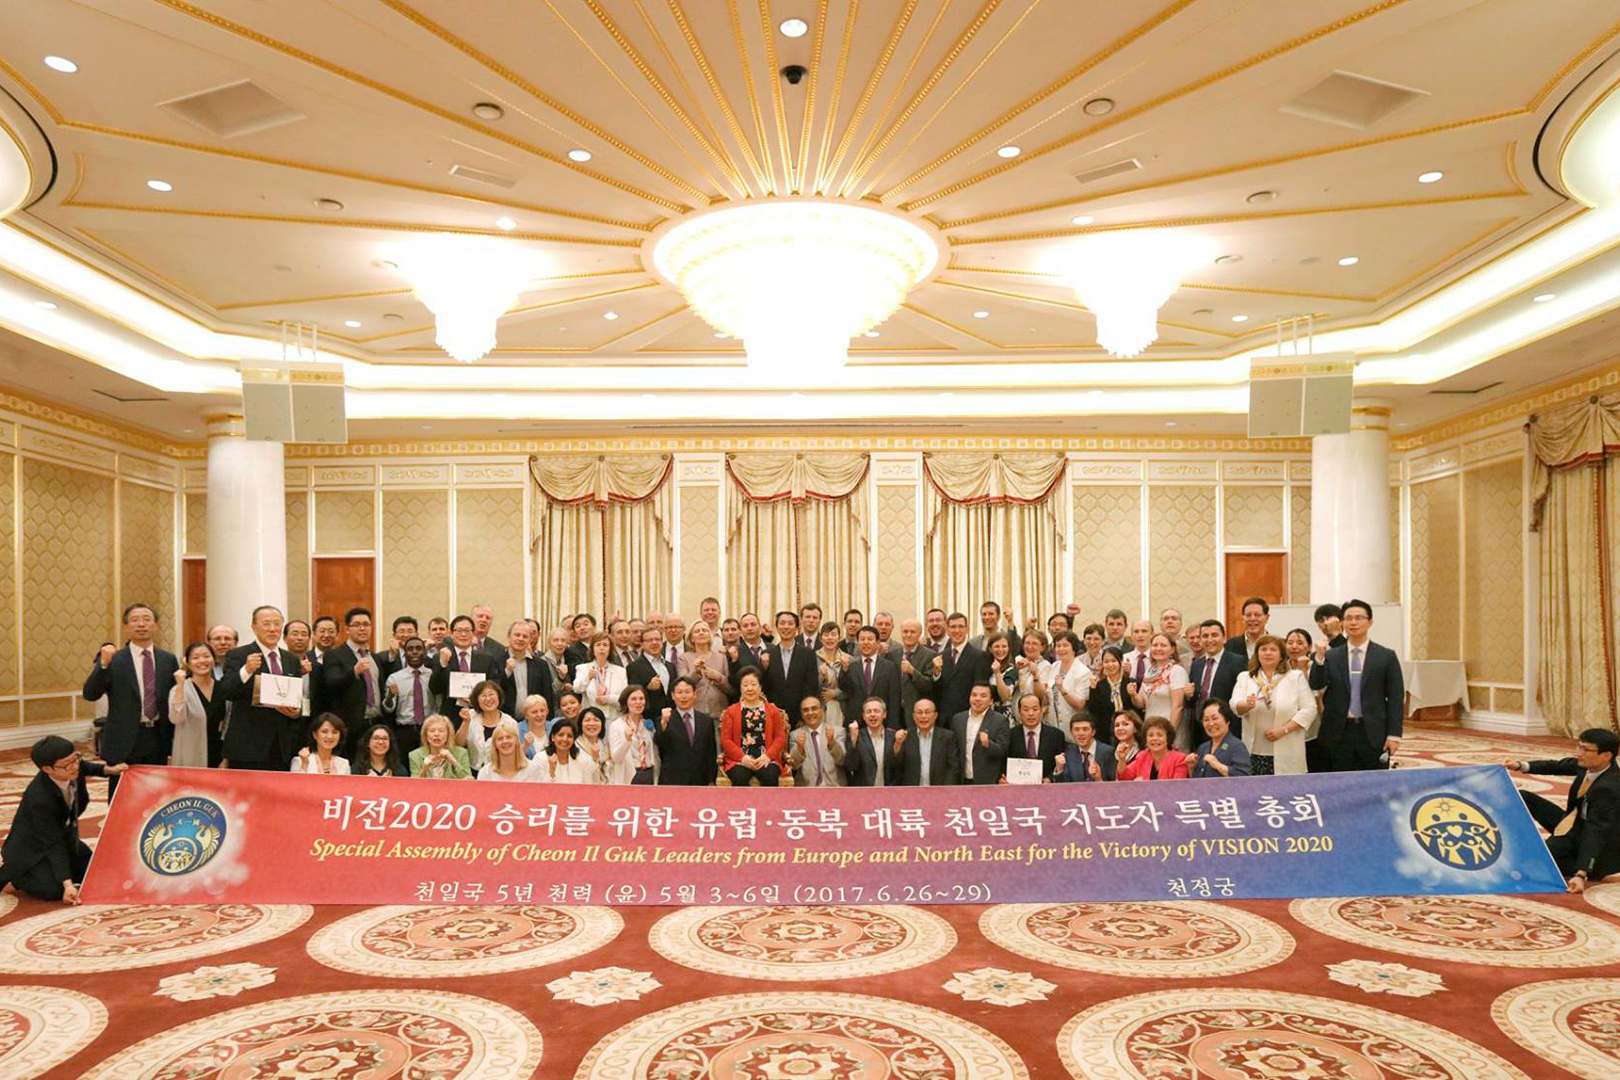 True Mother at the Closing Ceremony for the Special Assembly of Cheon Il Guk Leaders from Europe and Northeast for the Victory of Vision 2020 (June 29, 2017 – Cheon Jeong Gung)